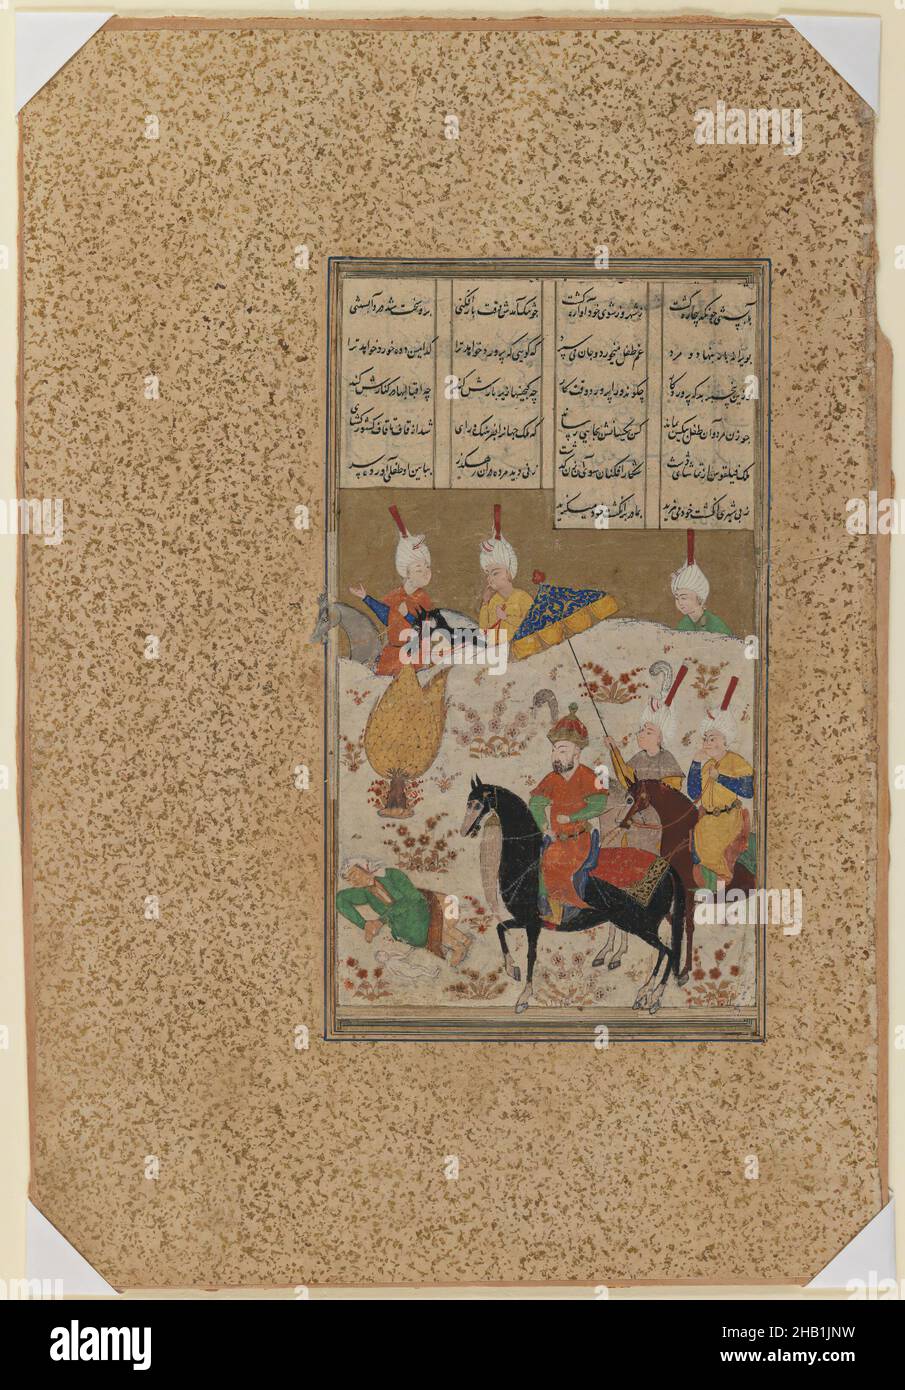 Illustrated Folio from a Manuscript of Persian Poetry showing a Ruler on  Horseback Witnessing a Birth Scene, Ink, opaque watercolors, and gold on  paper, 1530-1540, Safavid, Sheet: 10 3/4 x 7 1/2